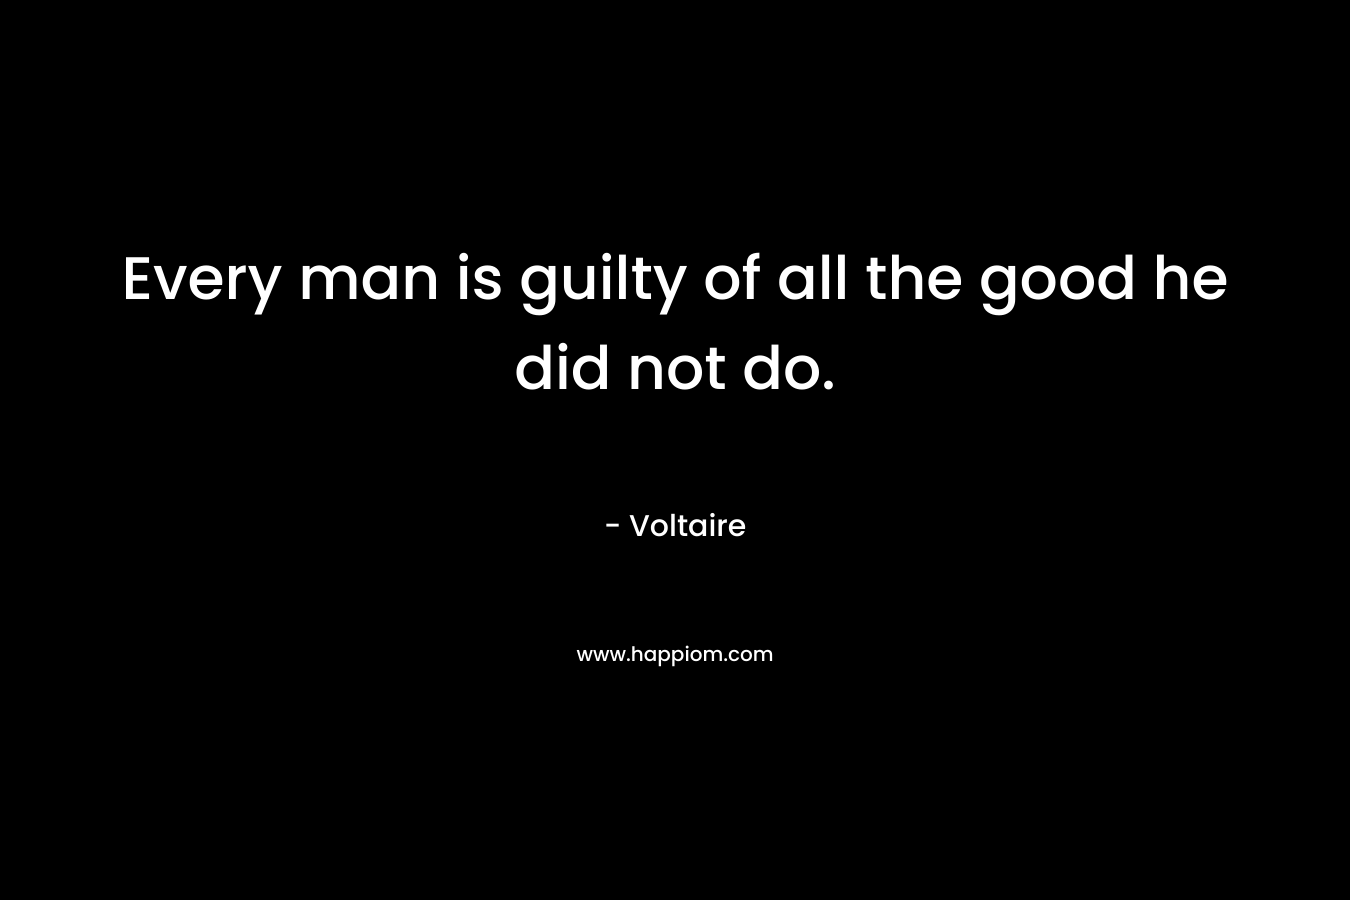 Every man is guilty of all the good he did not do. – Voltaire